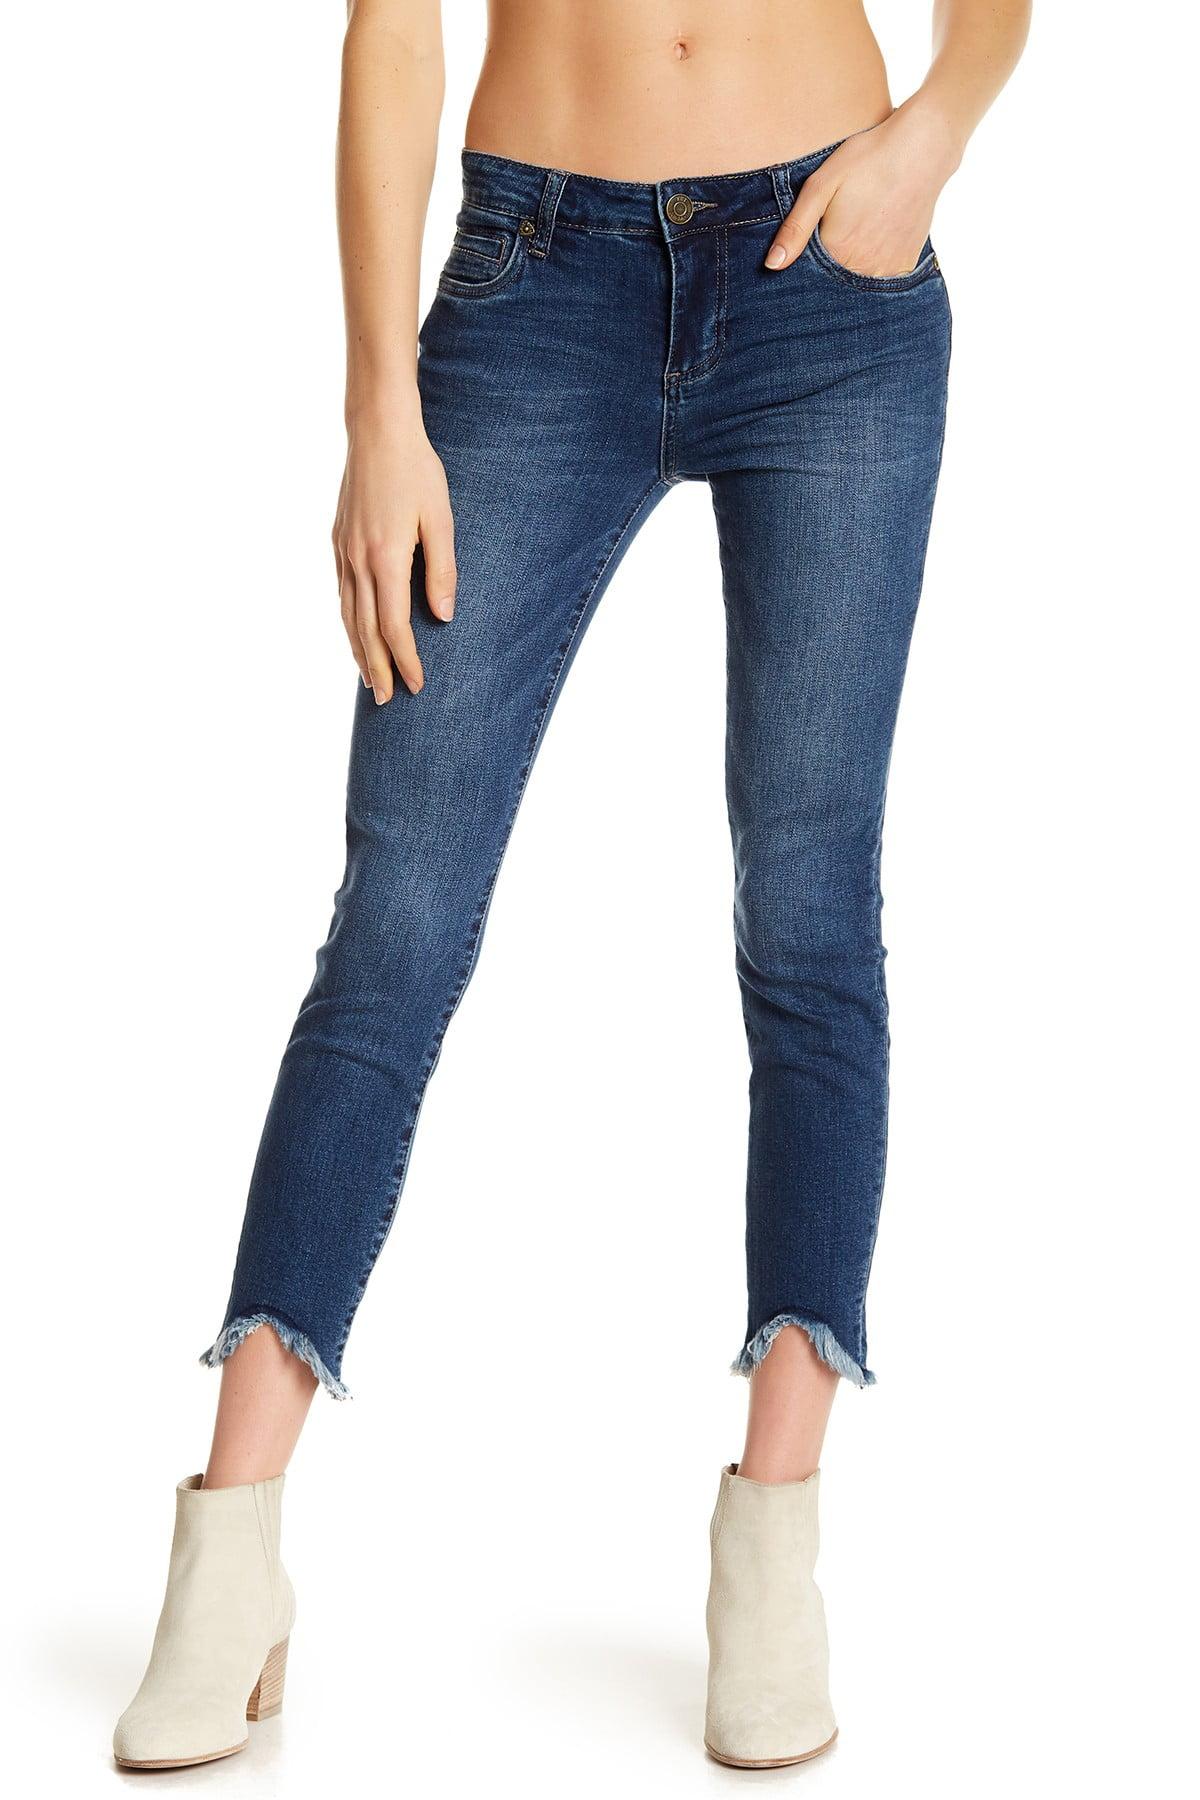 Kut From The Kloth Carlo Skinny Ankle Jeans in Blue | Lyst